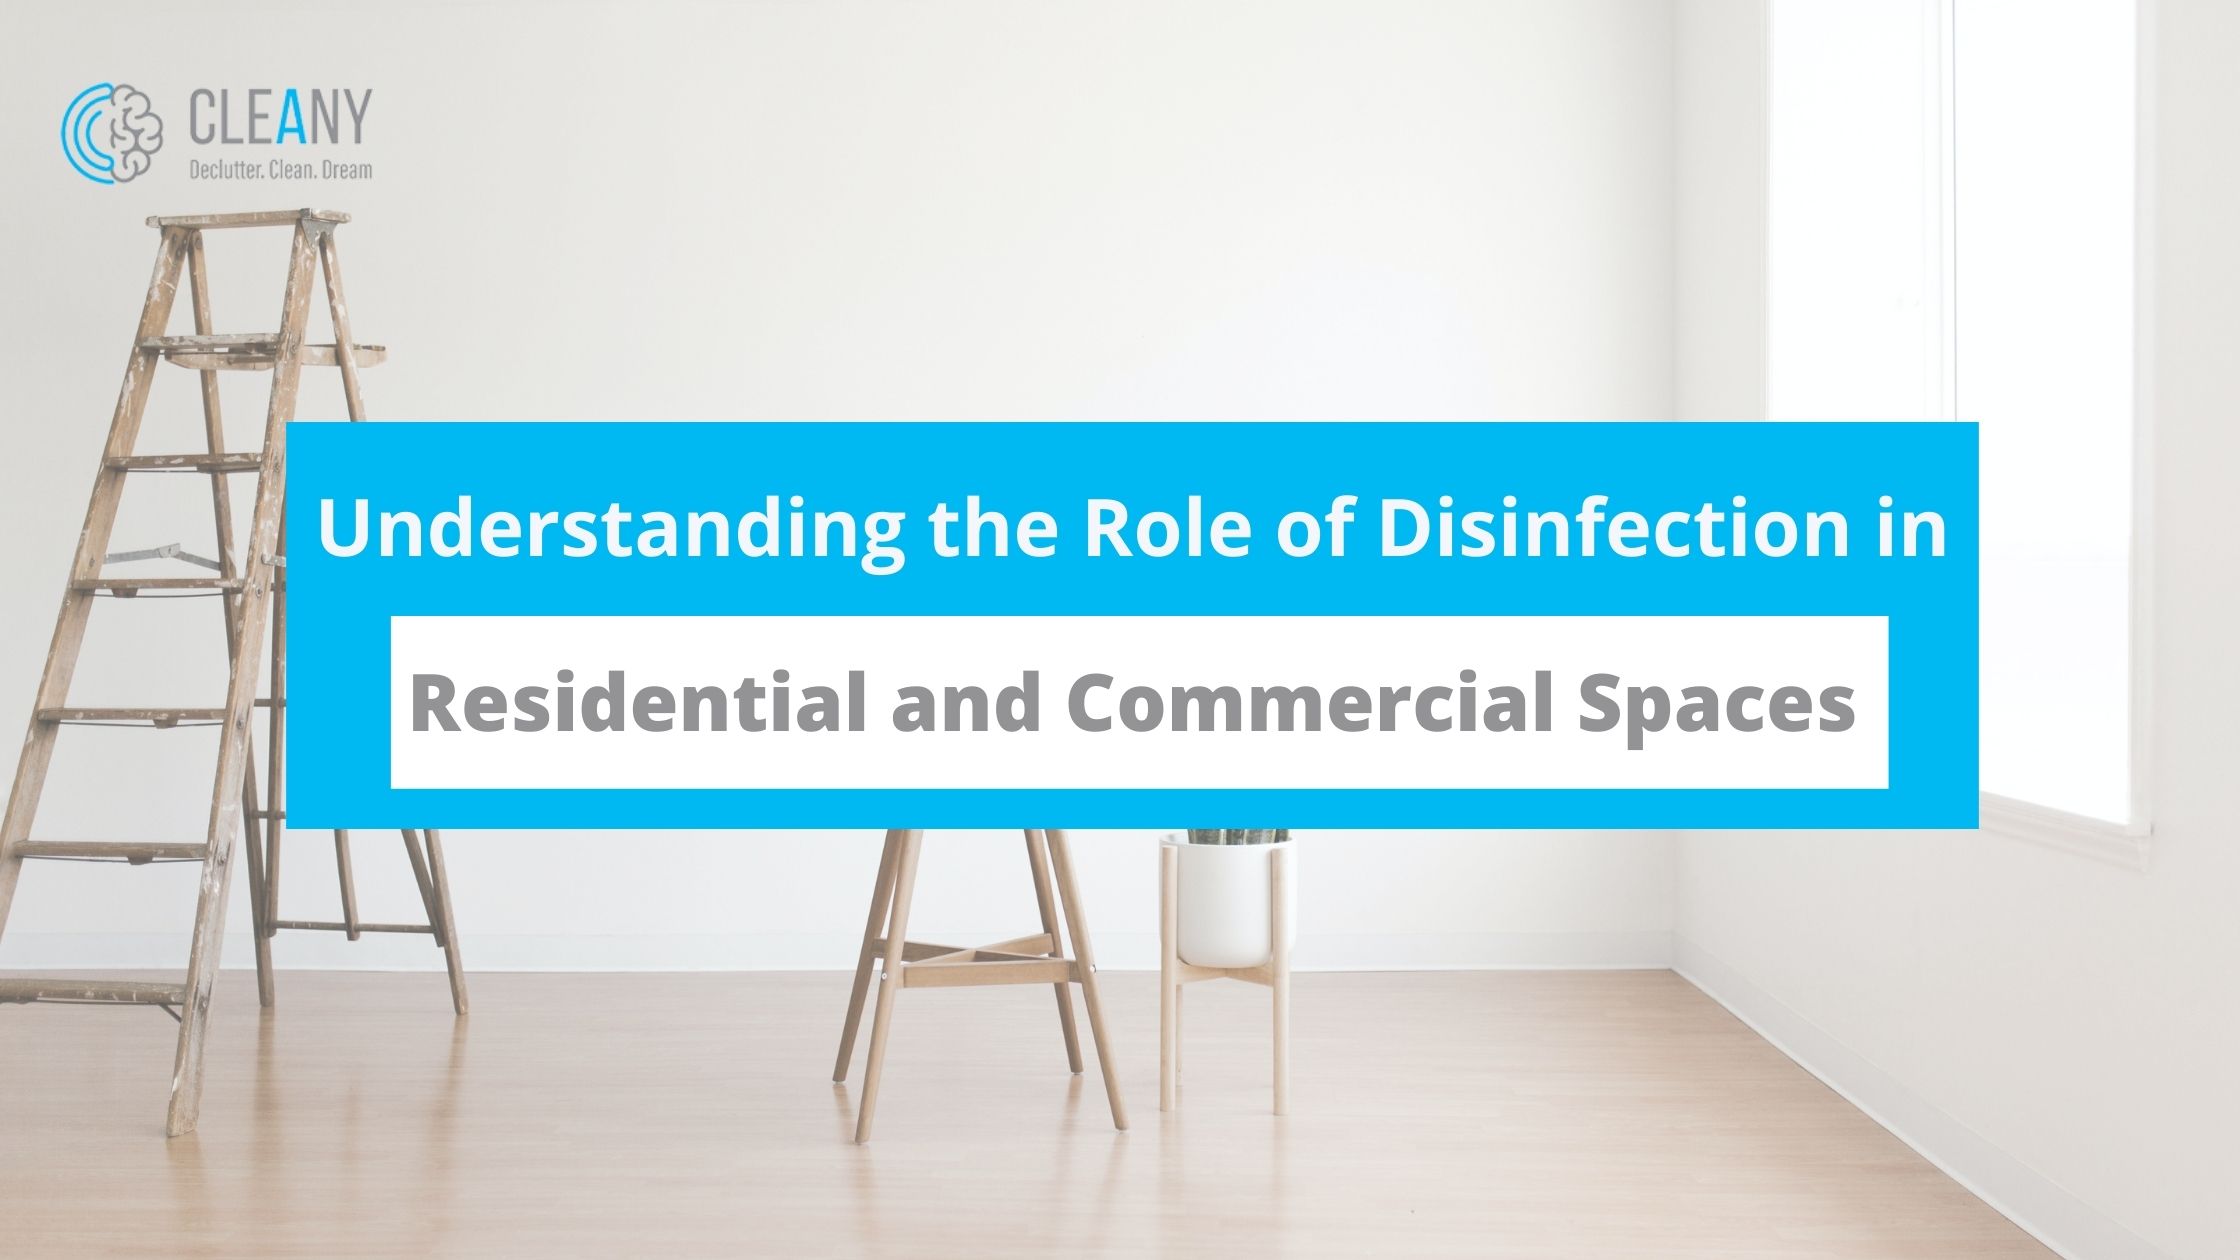 Understanding the Role of Disinfection in Residential and Commercial Spaces